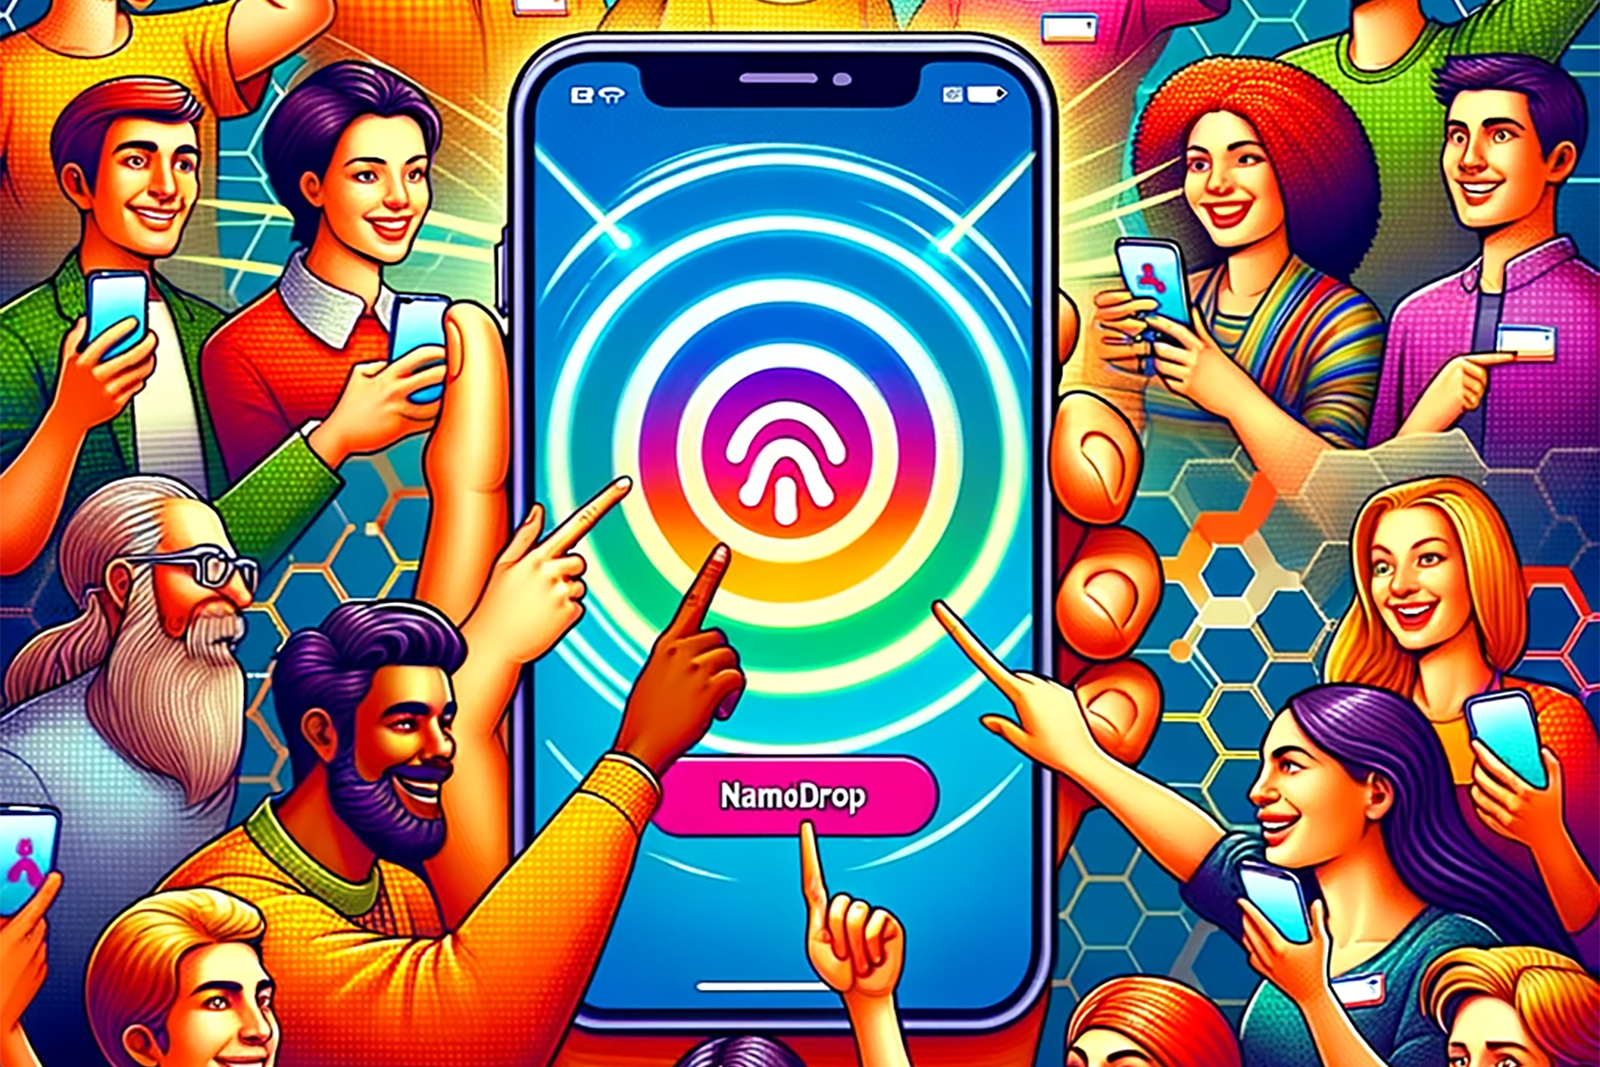 A vibrant, colorful illustration showing a multitude of diverse people in a network, each holding up their iPhone showcasing the NameDrop feature. The